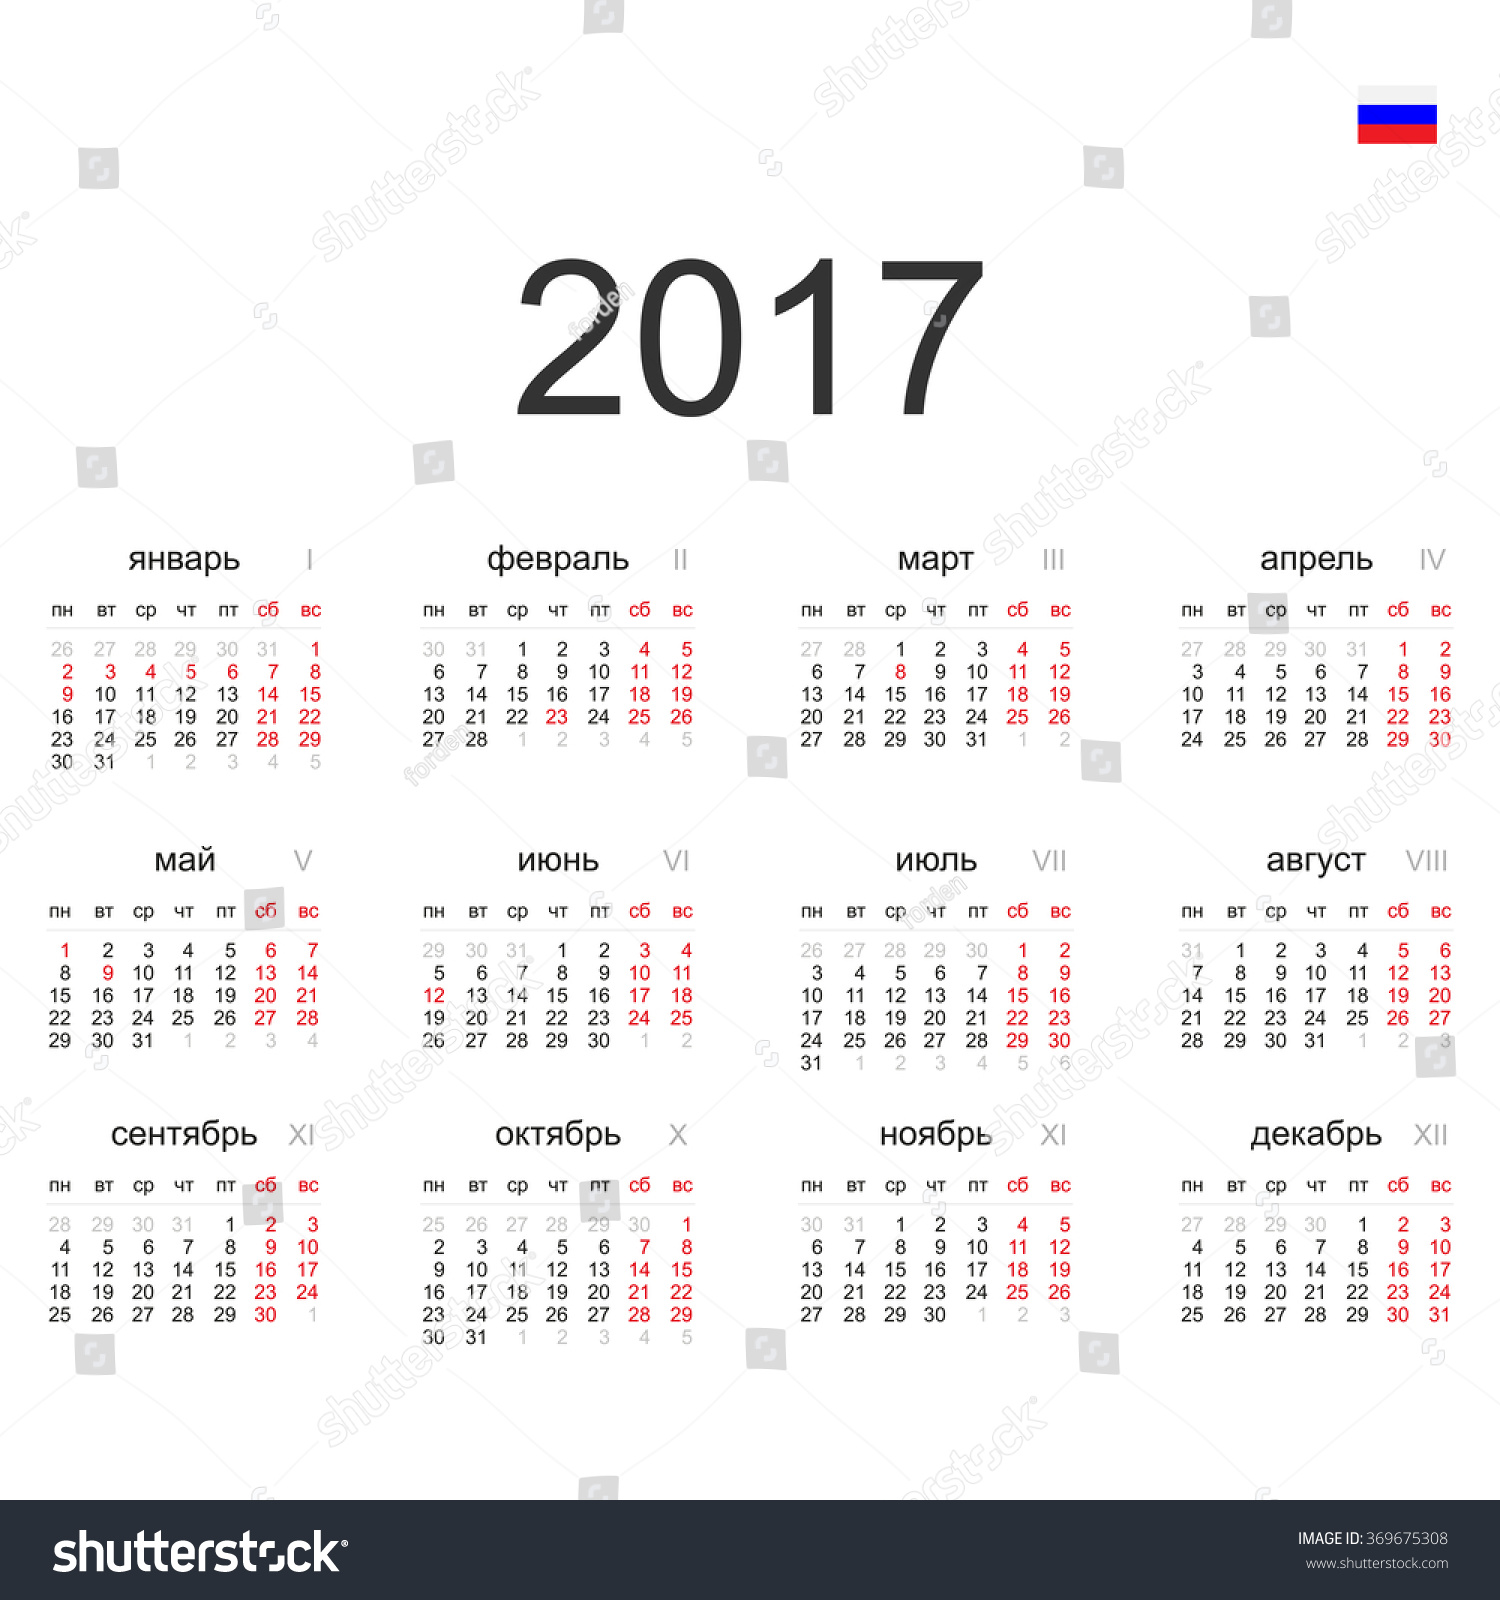 Russian In Months 2